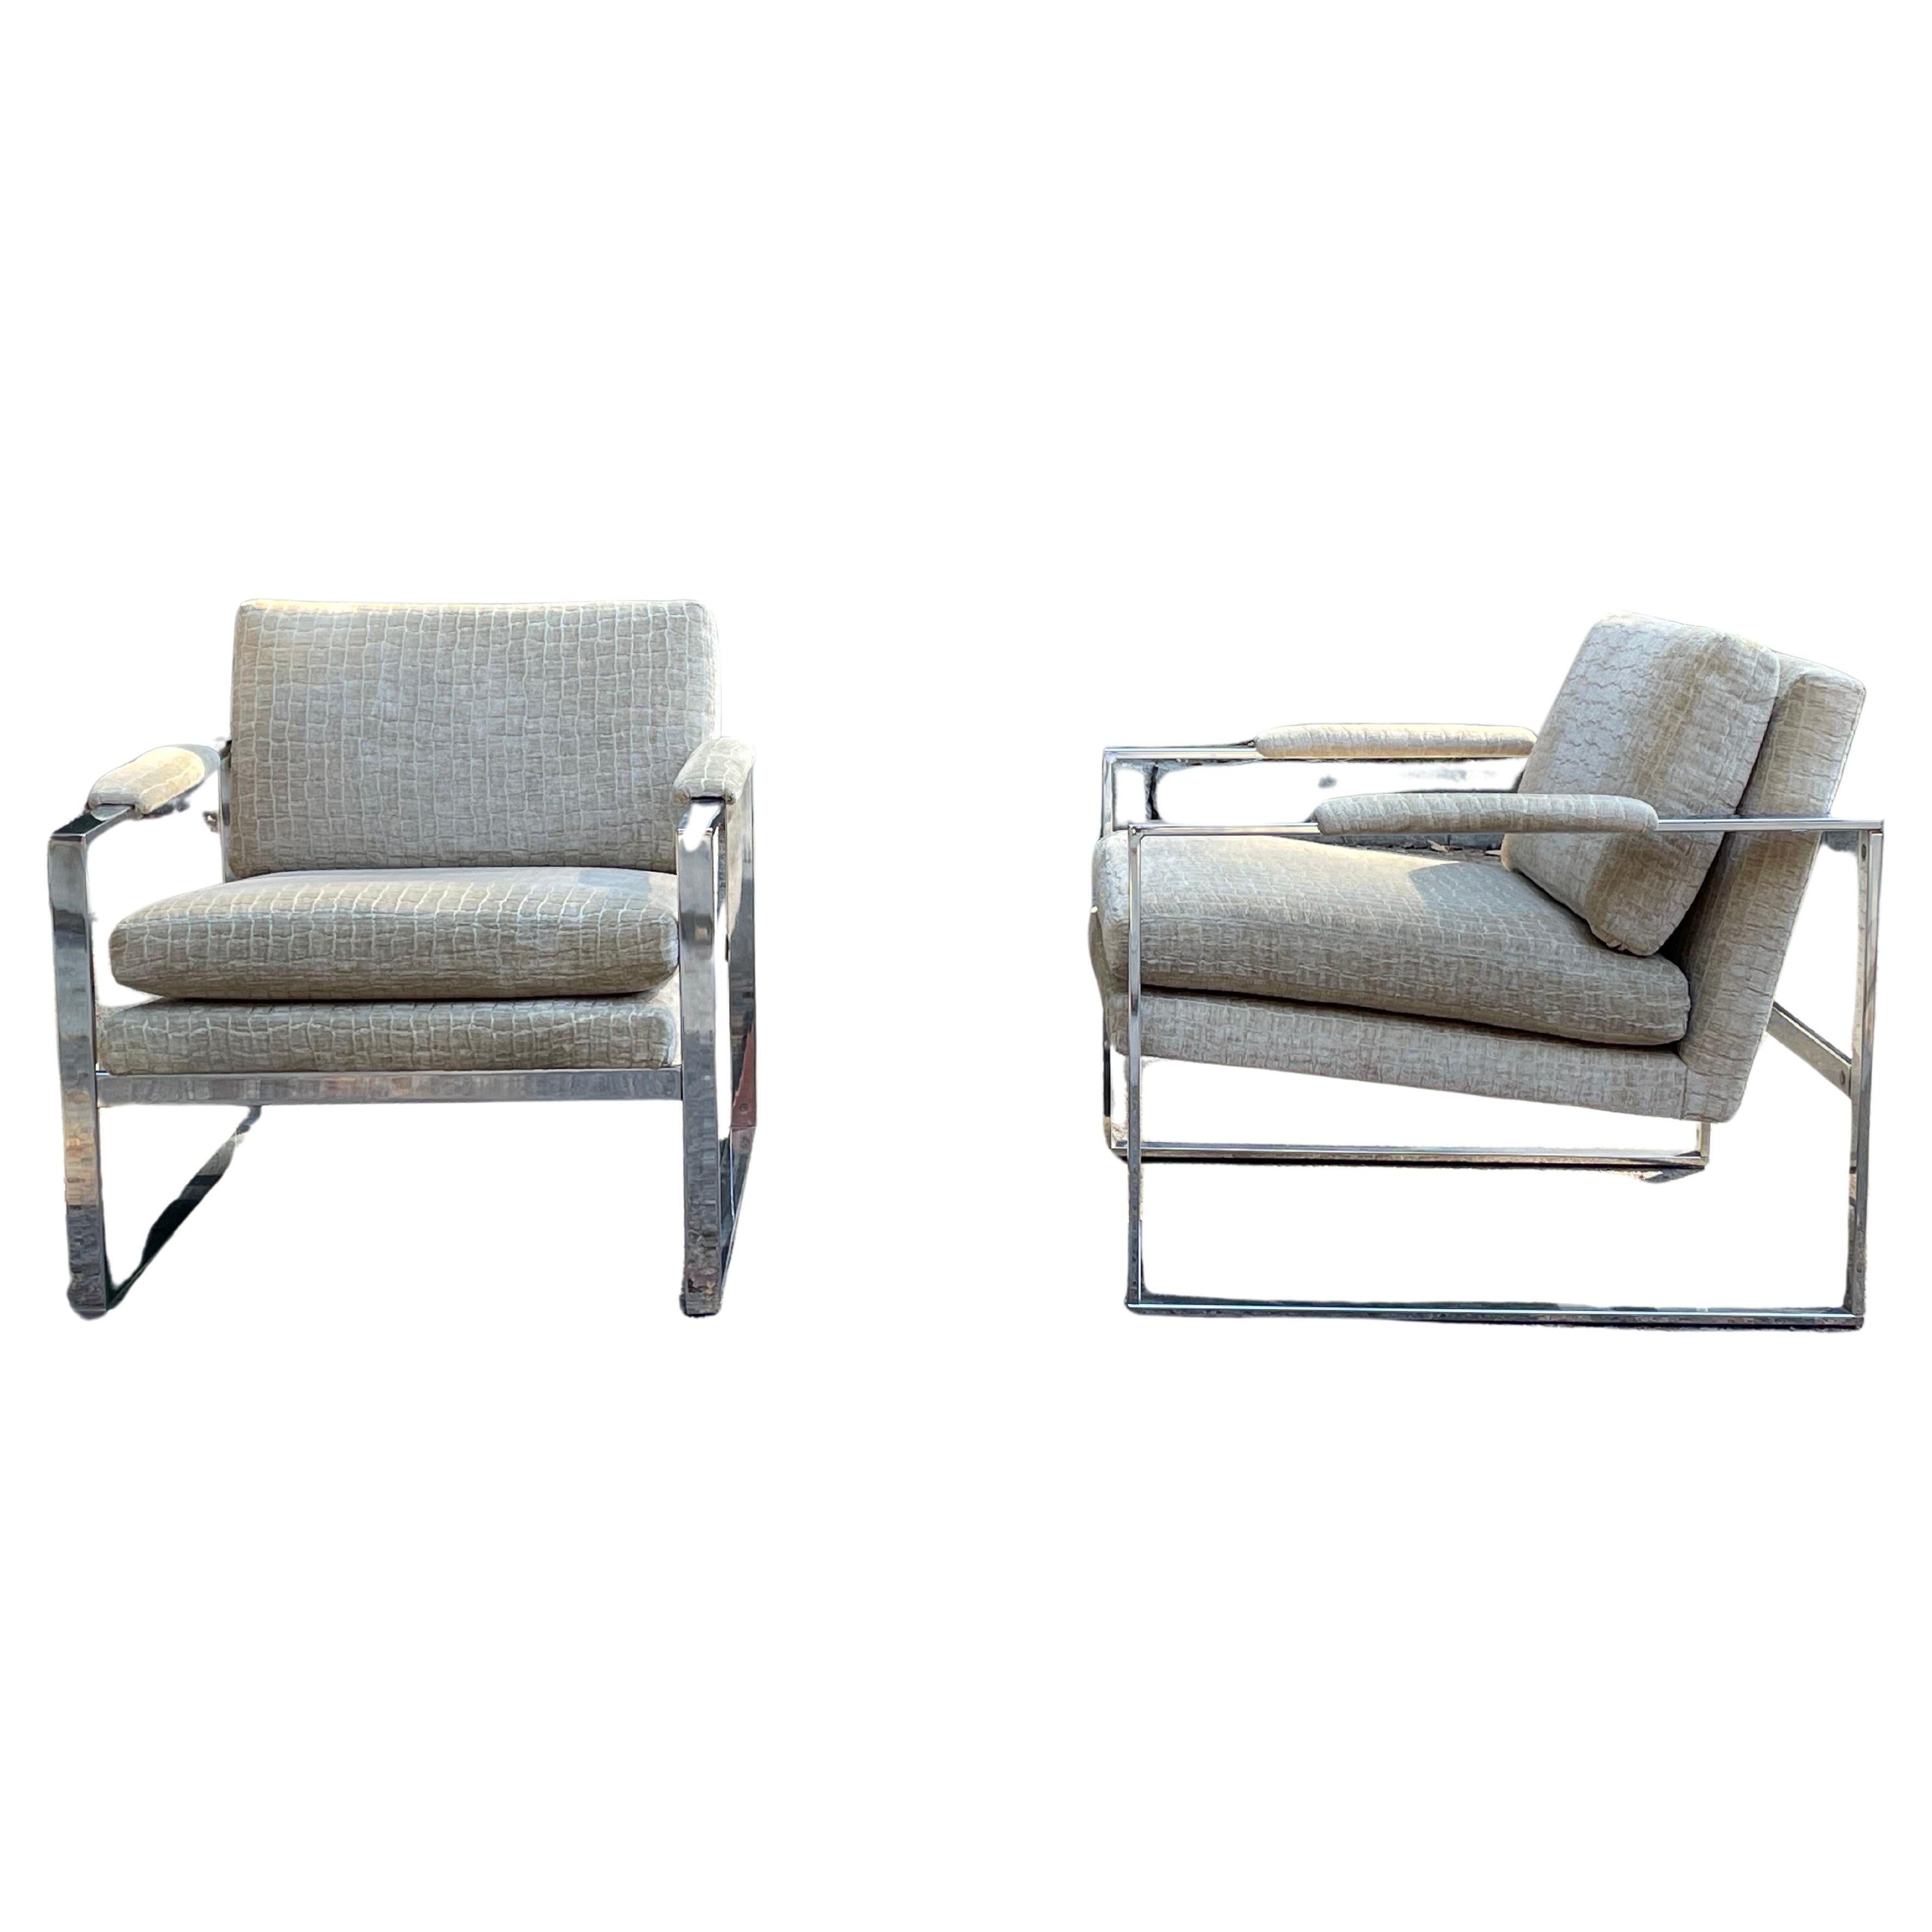 A stunning pair of vintage mid-century chrome lounge chairs attributed to Milo Baughman. High end upholstery perfectly complements the chrome.

Upholstery is in excellent condition. Chrome is also in very good condition with minor flaws as expected